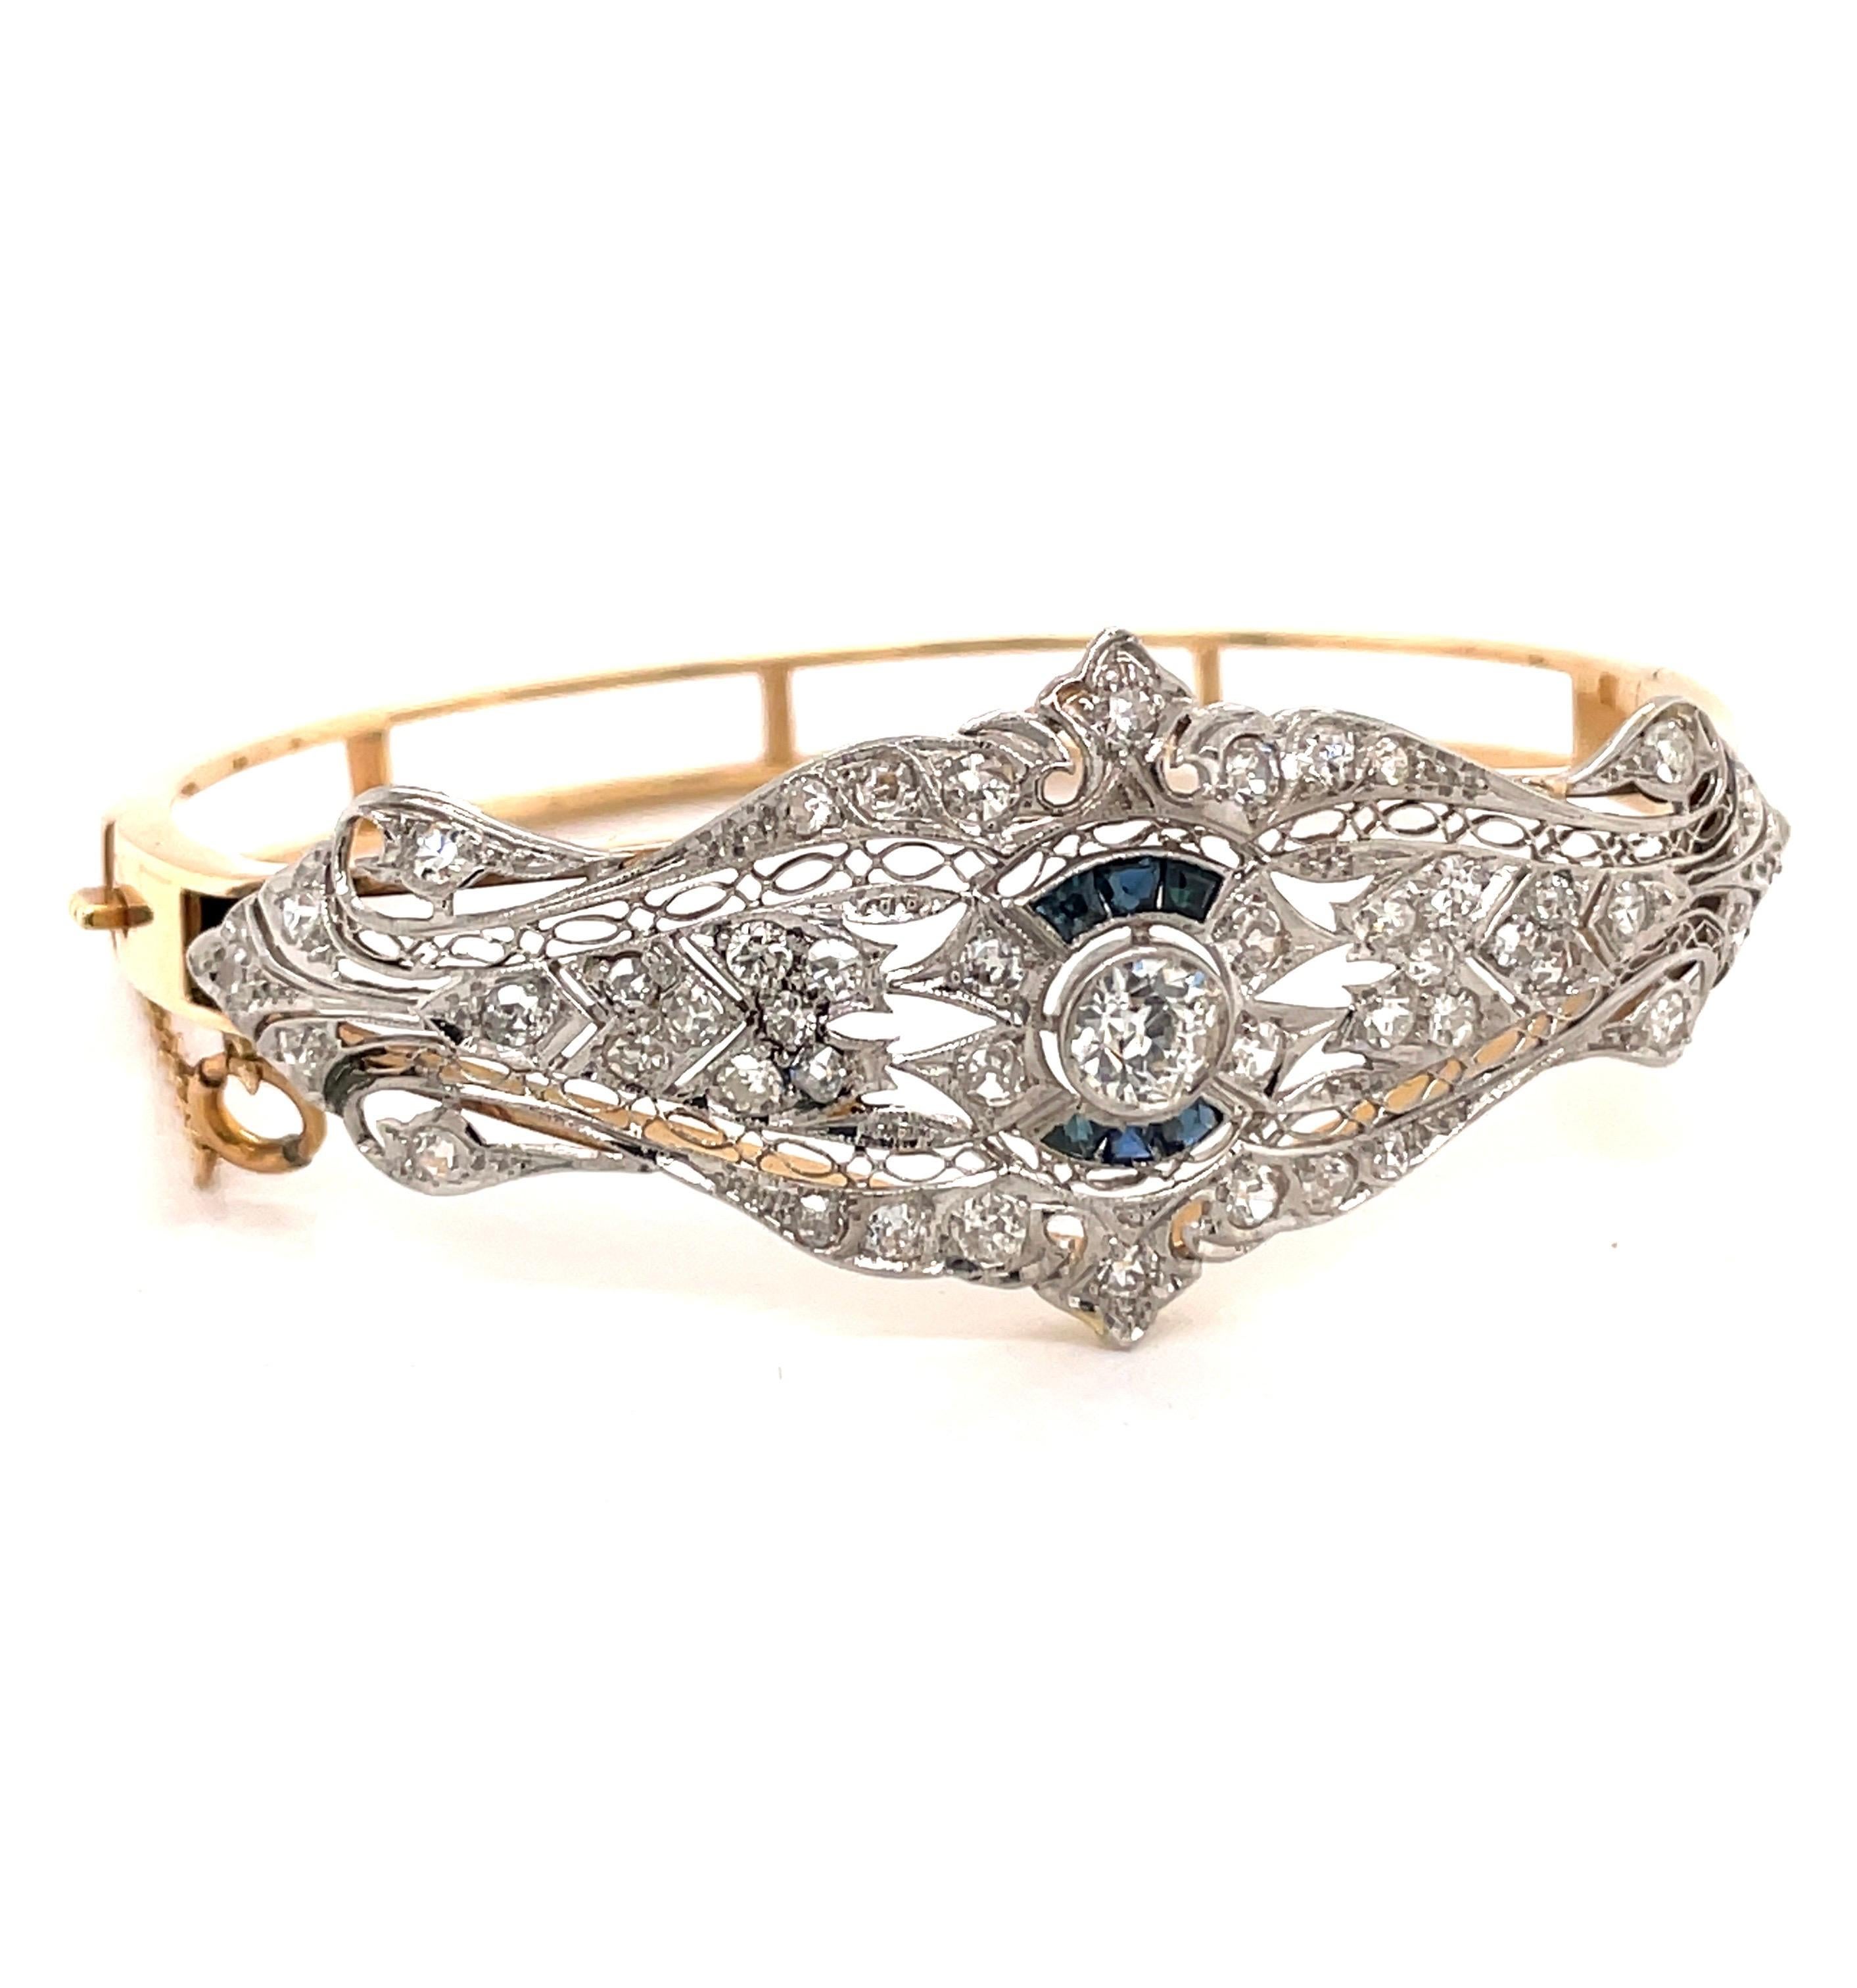 Vintage 1930's Whie Gold and 14K Yellow Gold Diamond Bangle Bracelet - The bangle contains one European cut diamond bezel set set that weighs approximately .50ct with I color and VS2 clarity. There are 6 trapezoid sapphires channel set with